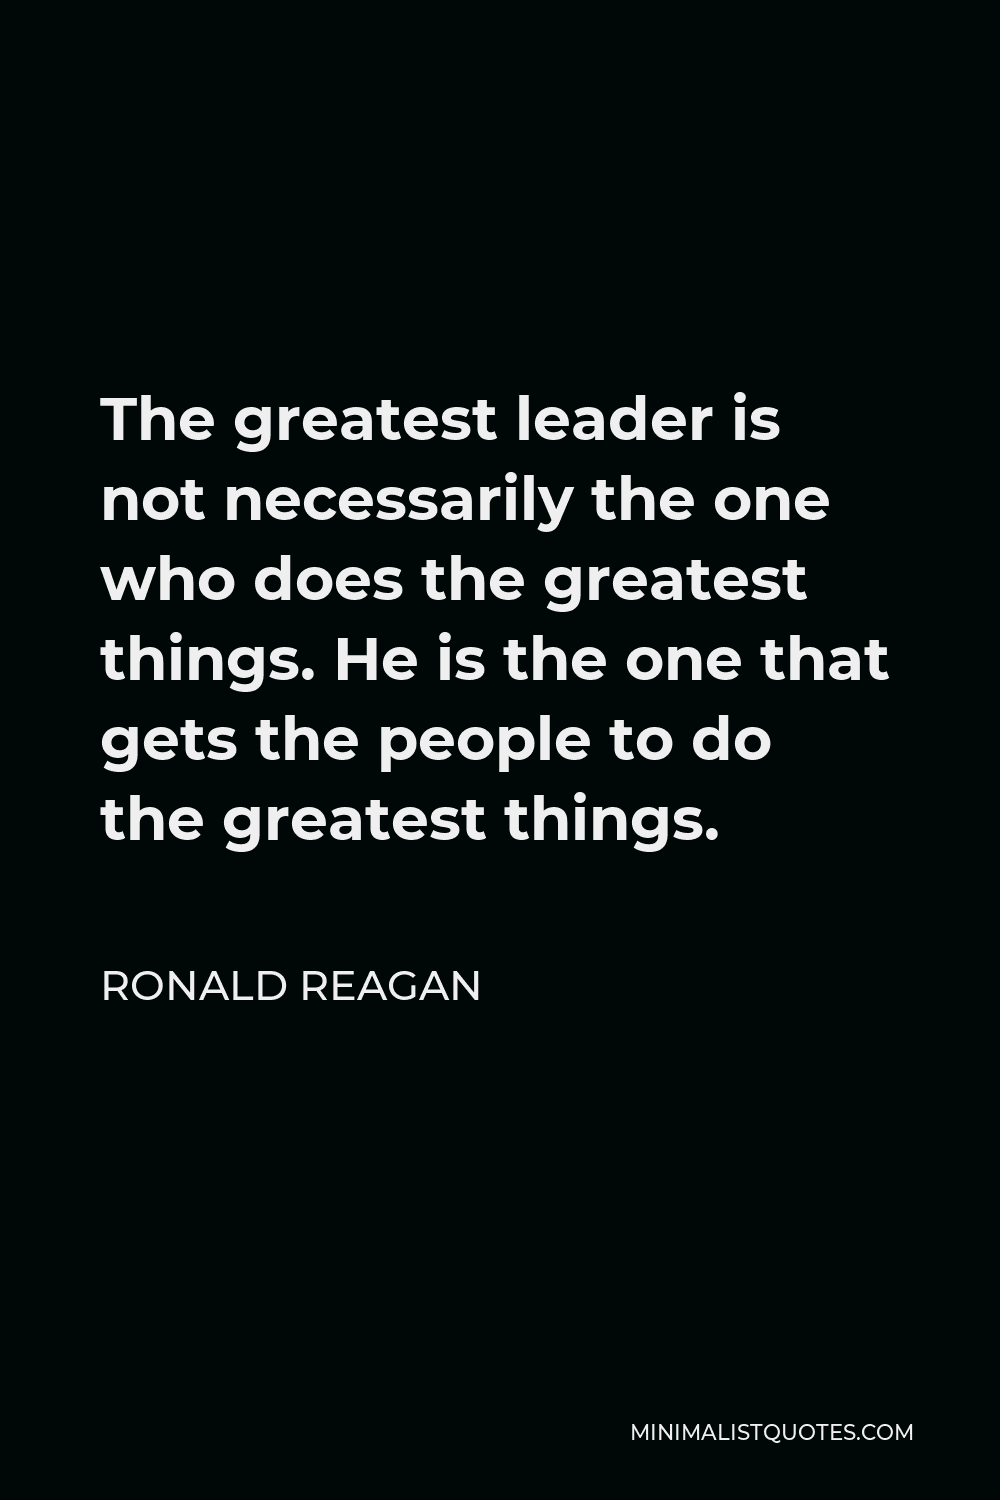 Ronald Reagan Quote: The greatest leader is not necessarily the one who ...